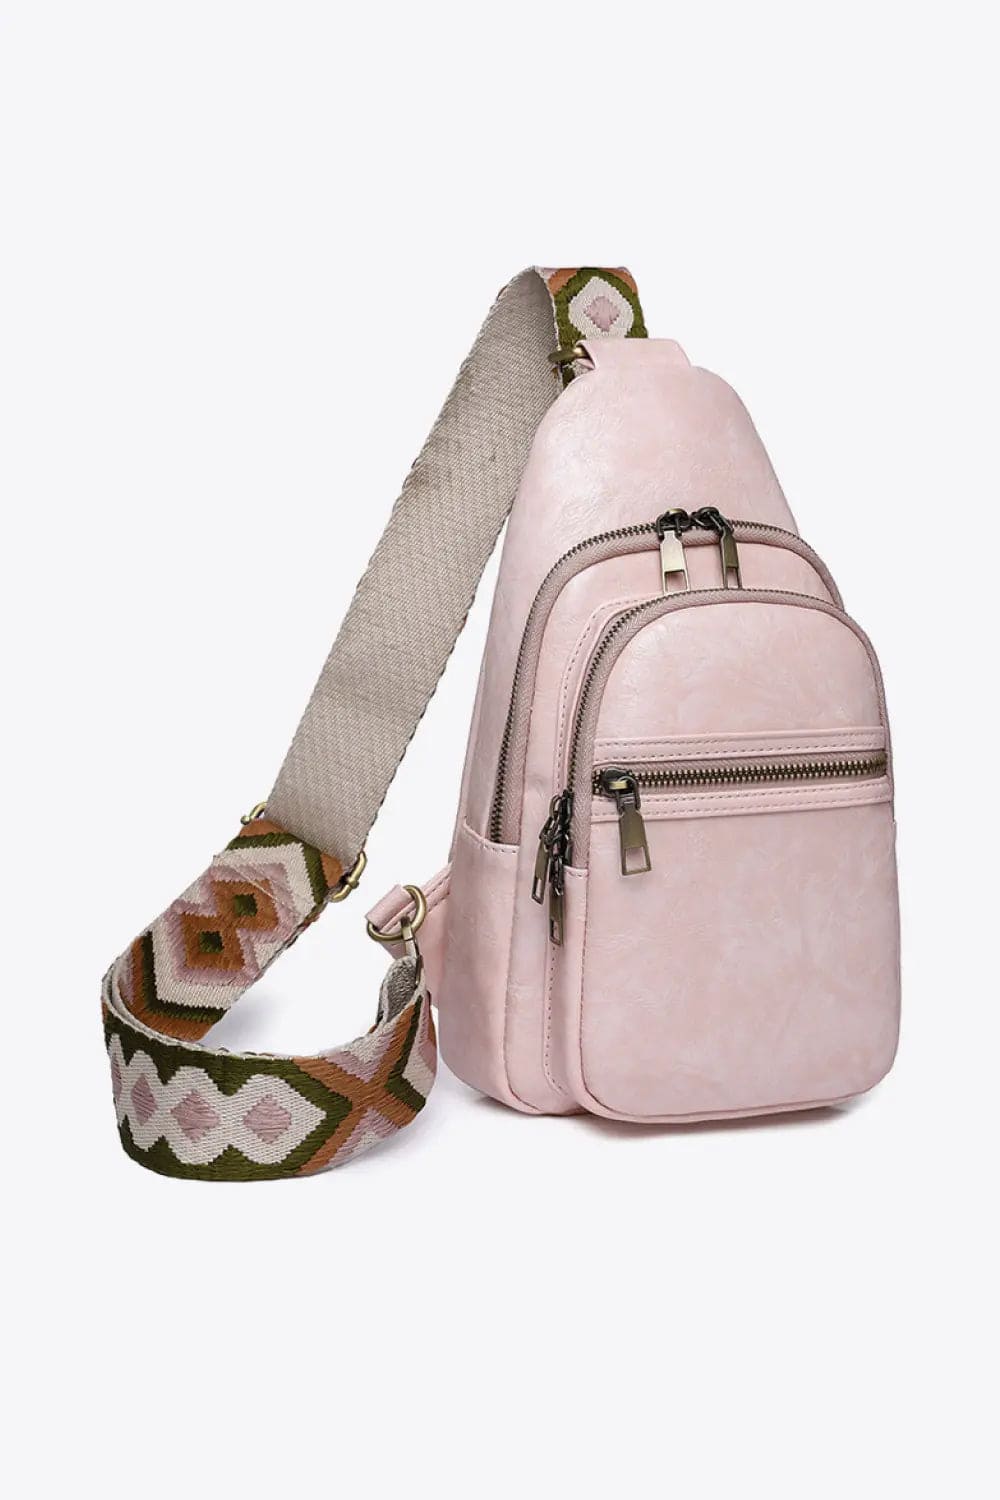  Leather Sling Bag | Backpack Purse | Trendy Fashion |